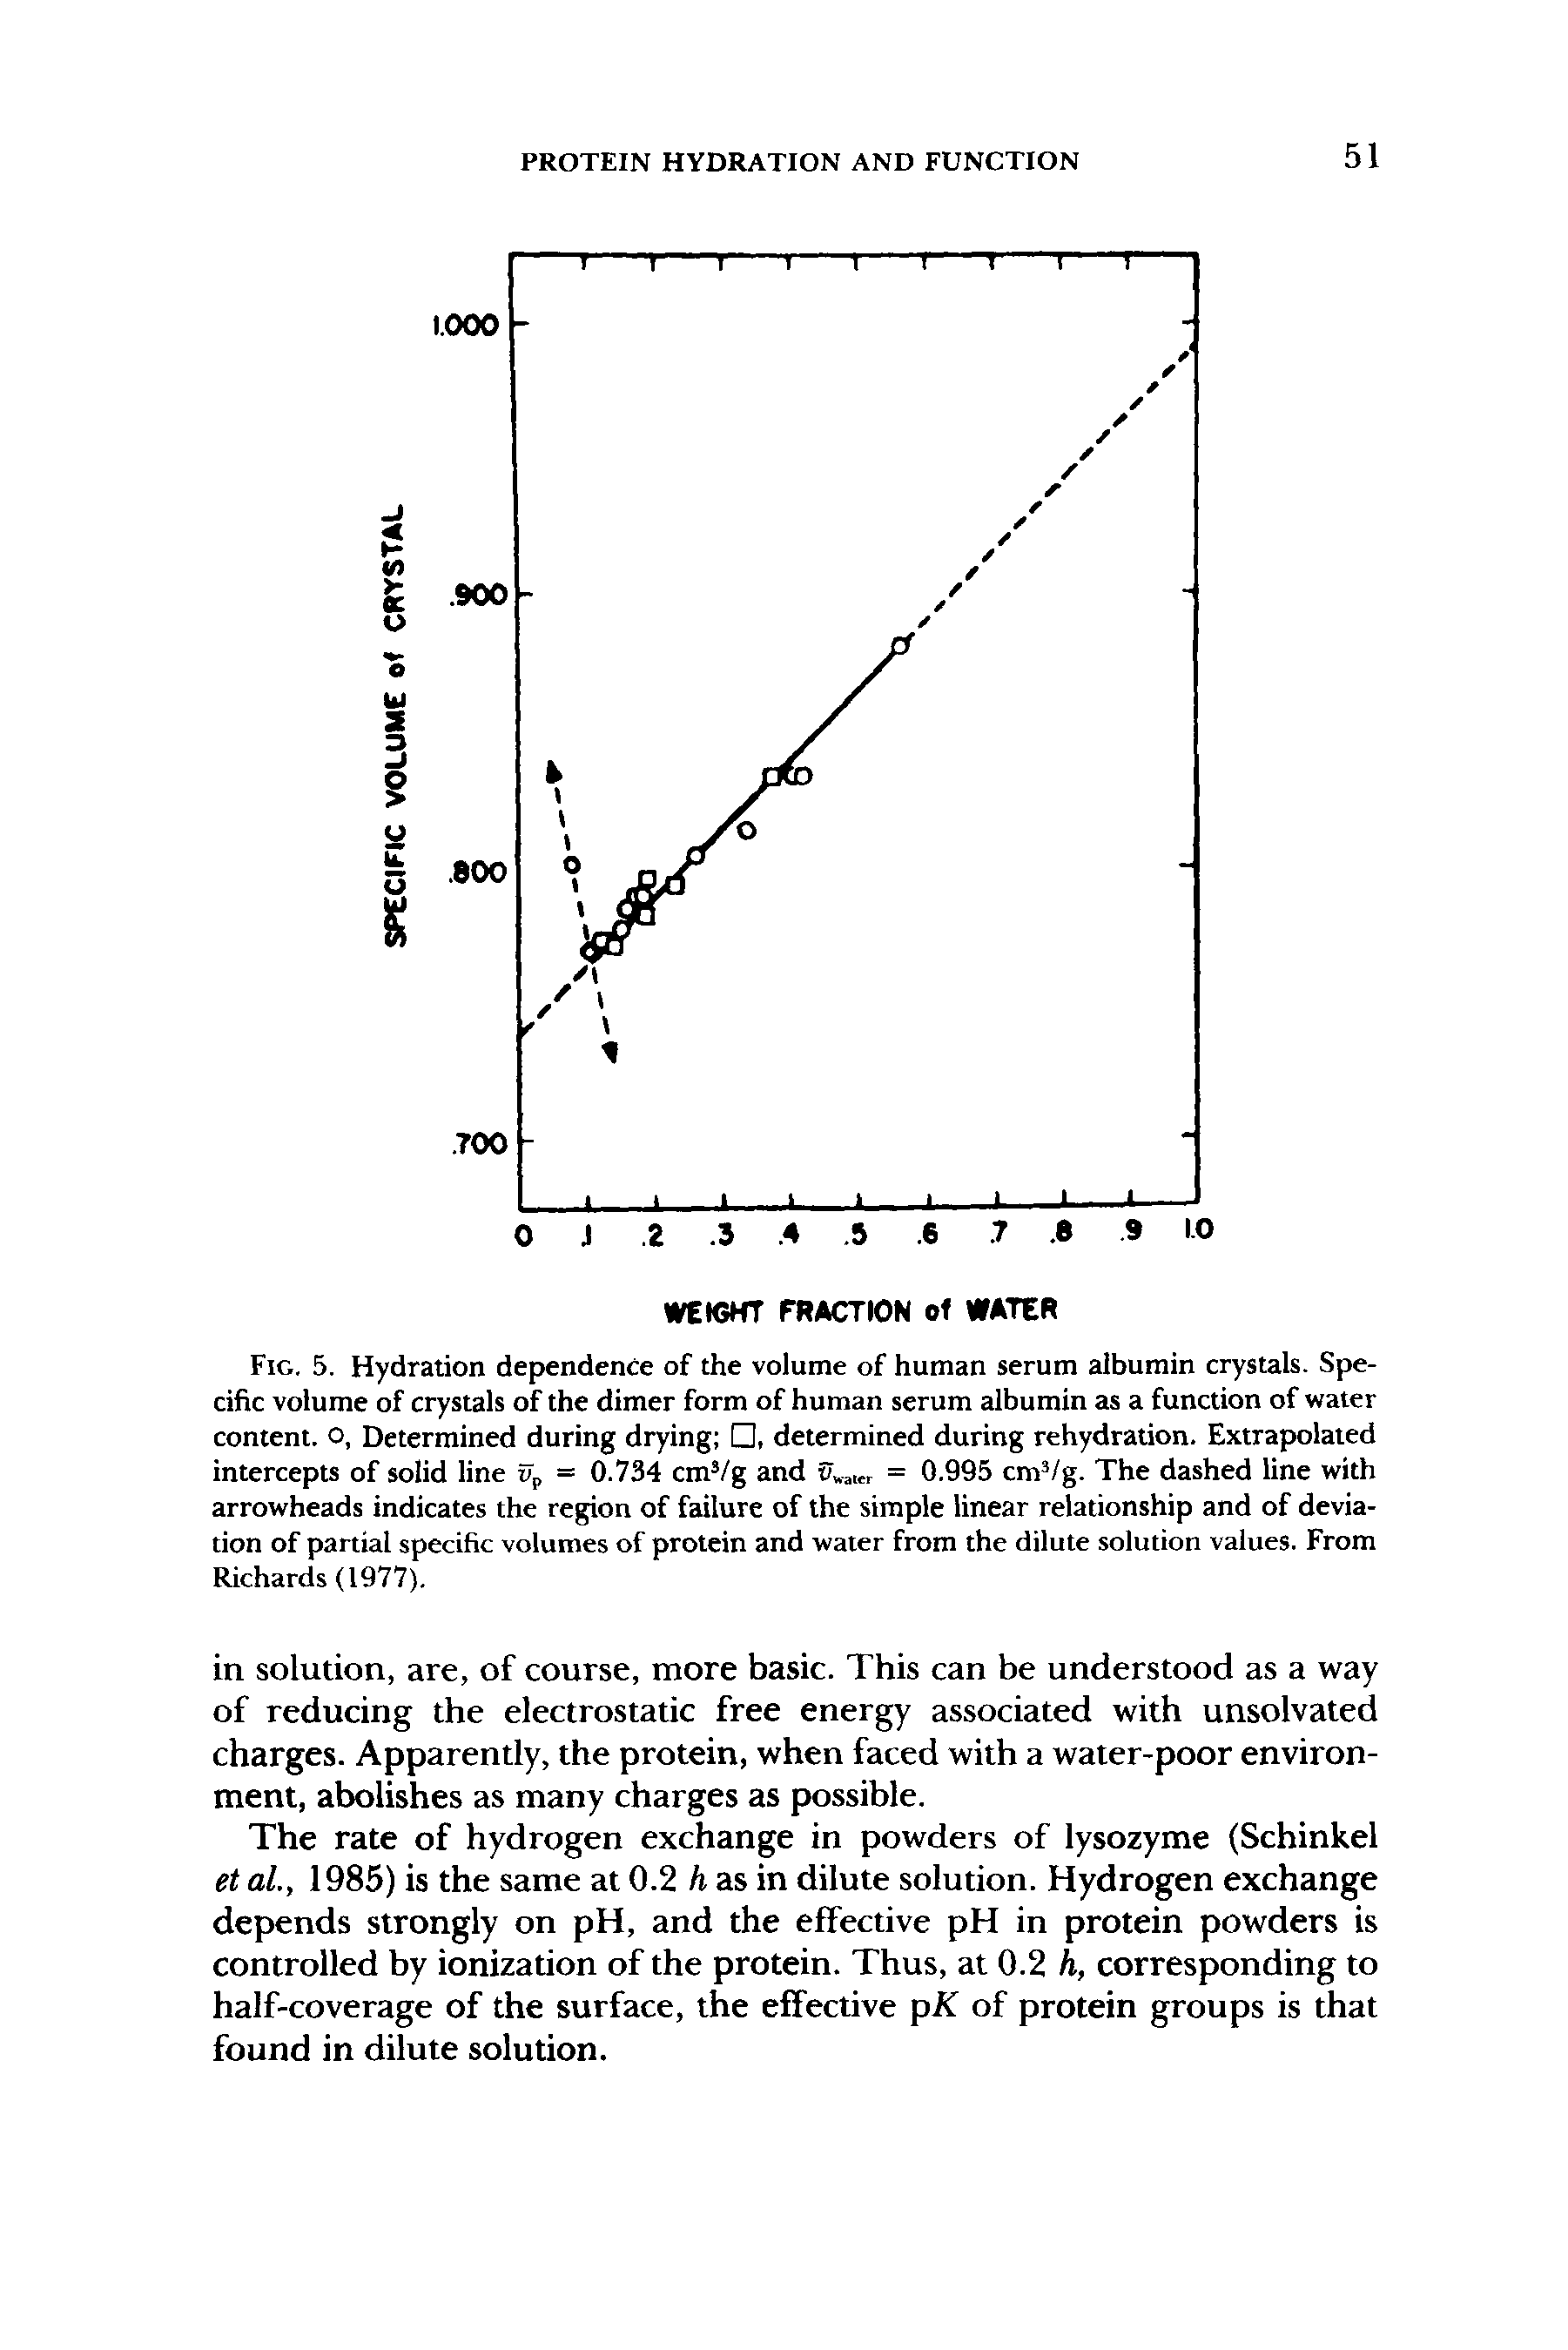 Fig. 5. Hydration dependence of the volume of human serum albumin crystals. Specific volume of crystals of the dimer form of human serum albumin as a function of water content, o, Determined during drying , determined during rehydration. Extrapolated intercepts of solid line Up = 0.734 cm /g and = 0.995 cm= /g. The dashed line with arrowheads indicates the region of failure of the simple linear relationship and of deviation of partial specific volumes of protein and water from the dilute solution values. From Richards (1977).